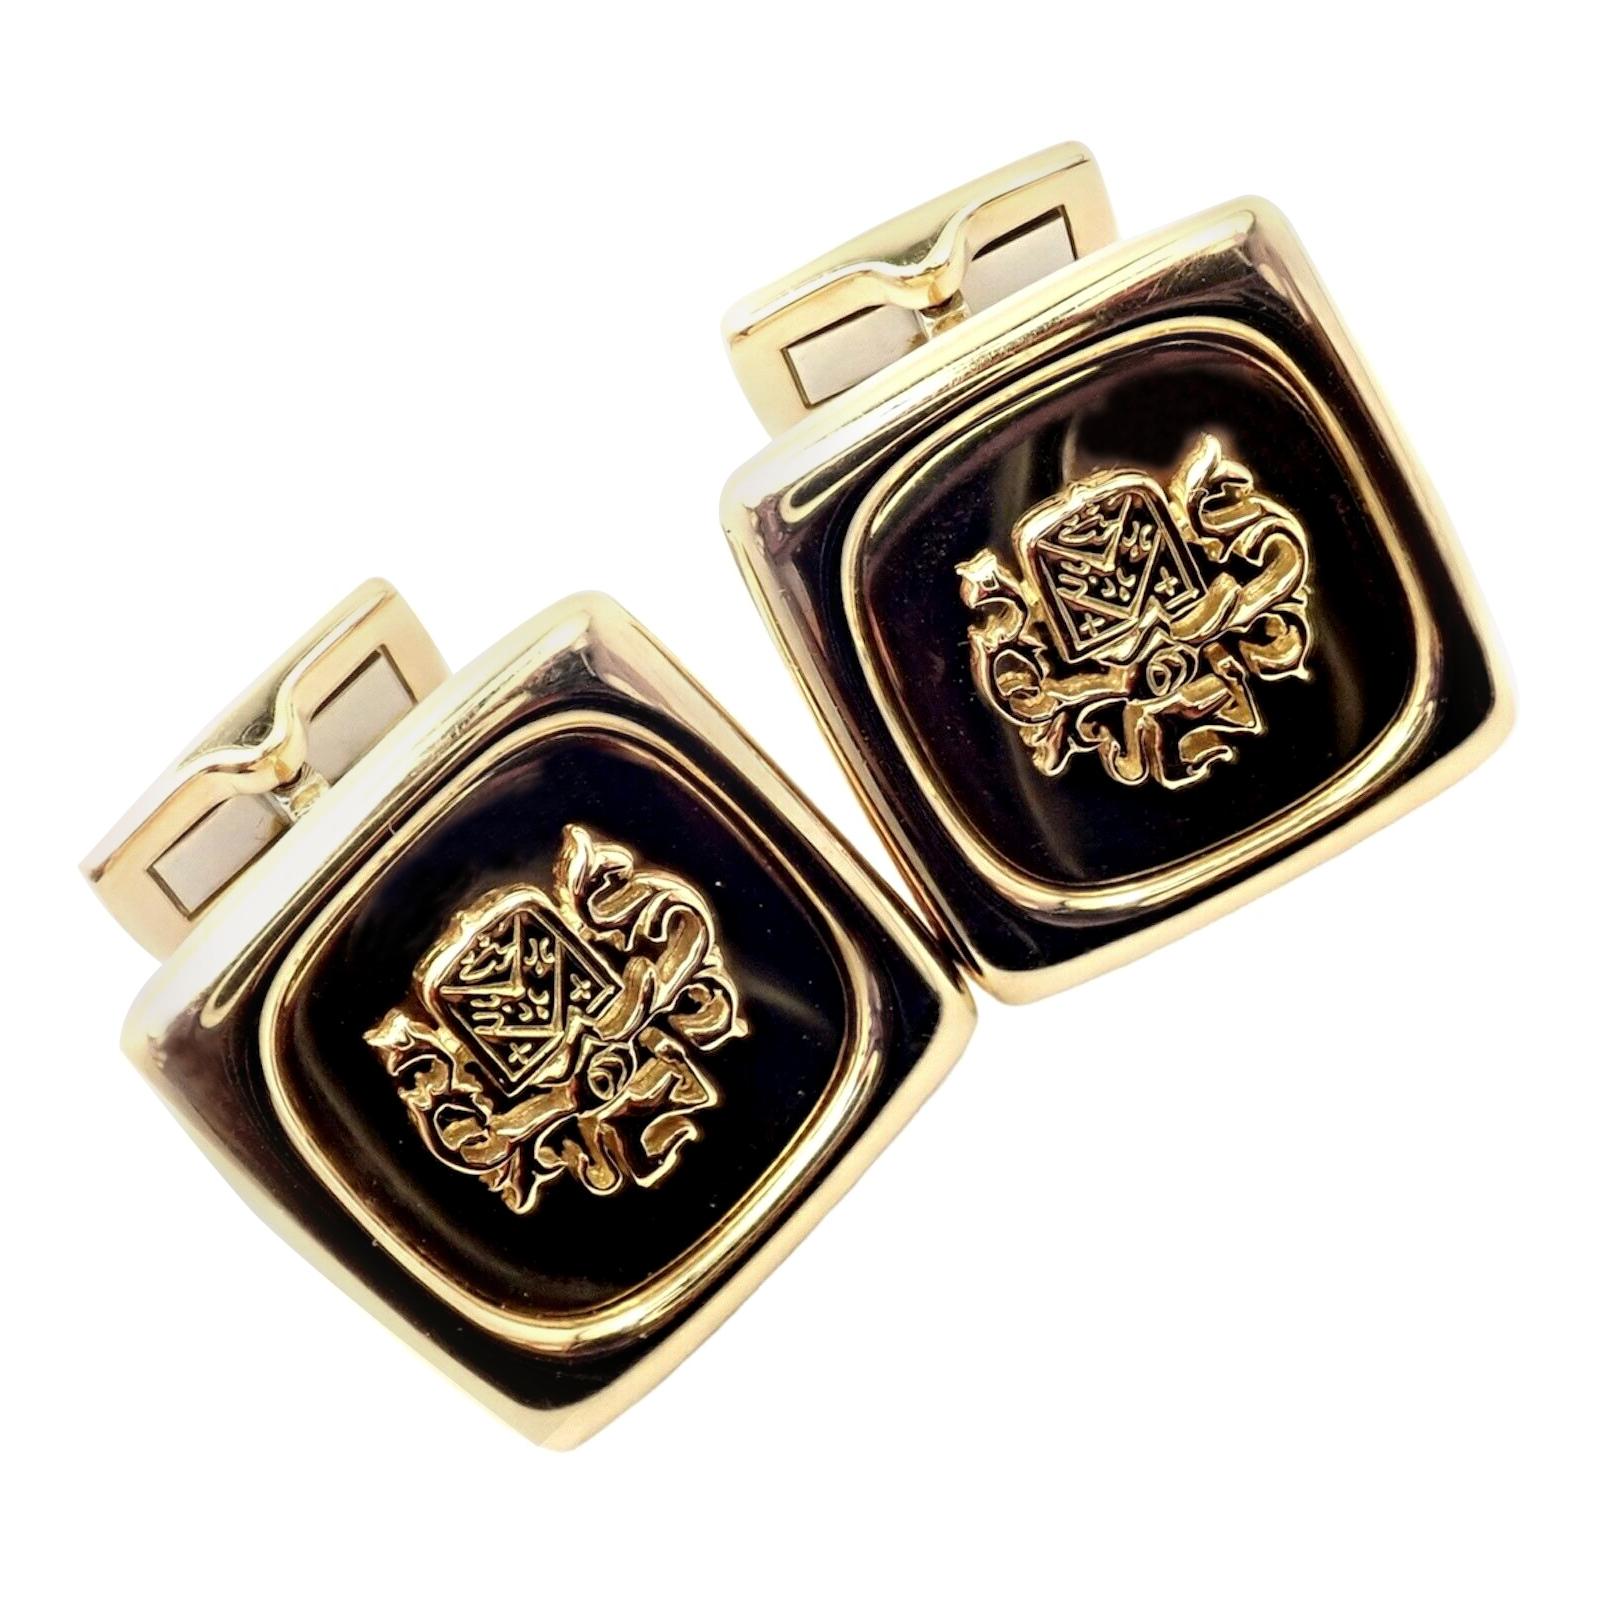 Piaget Coat of Arms Yellow Gold Cufflinks